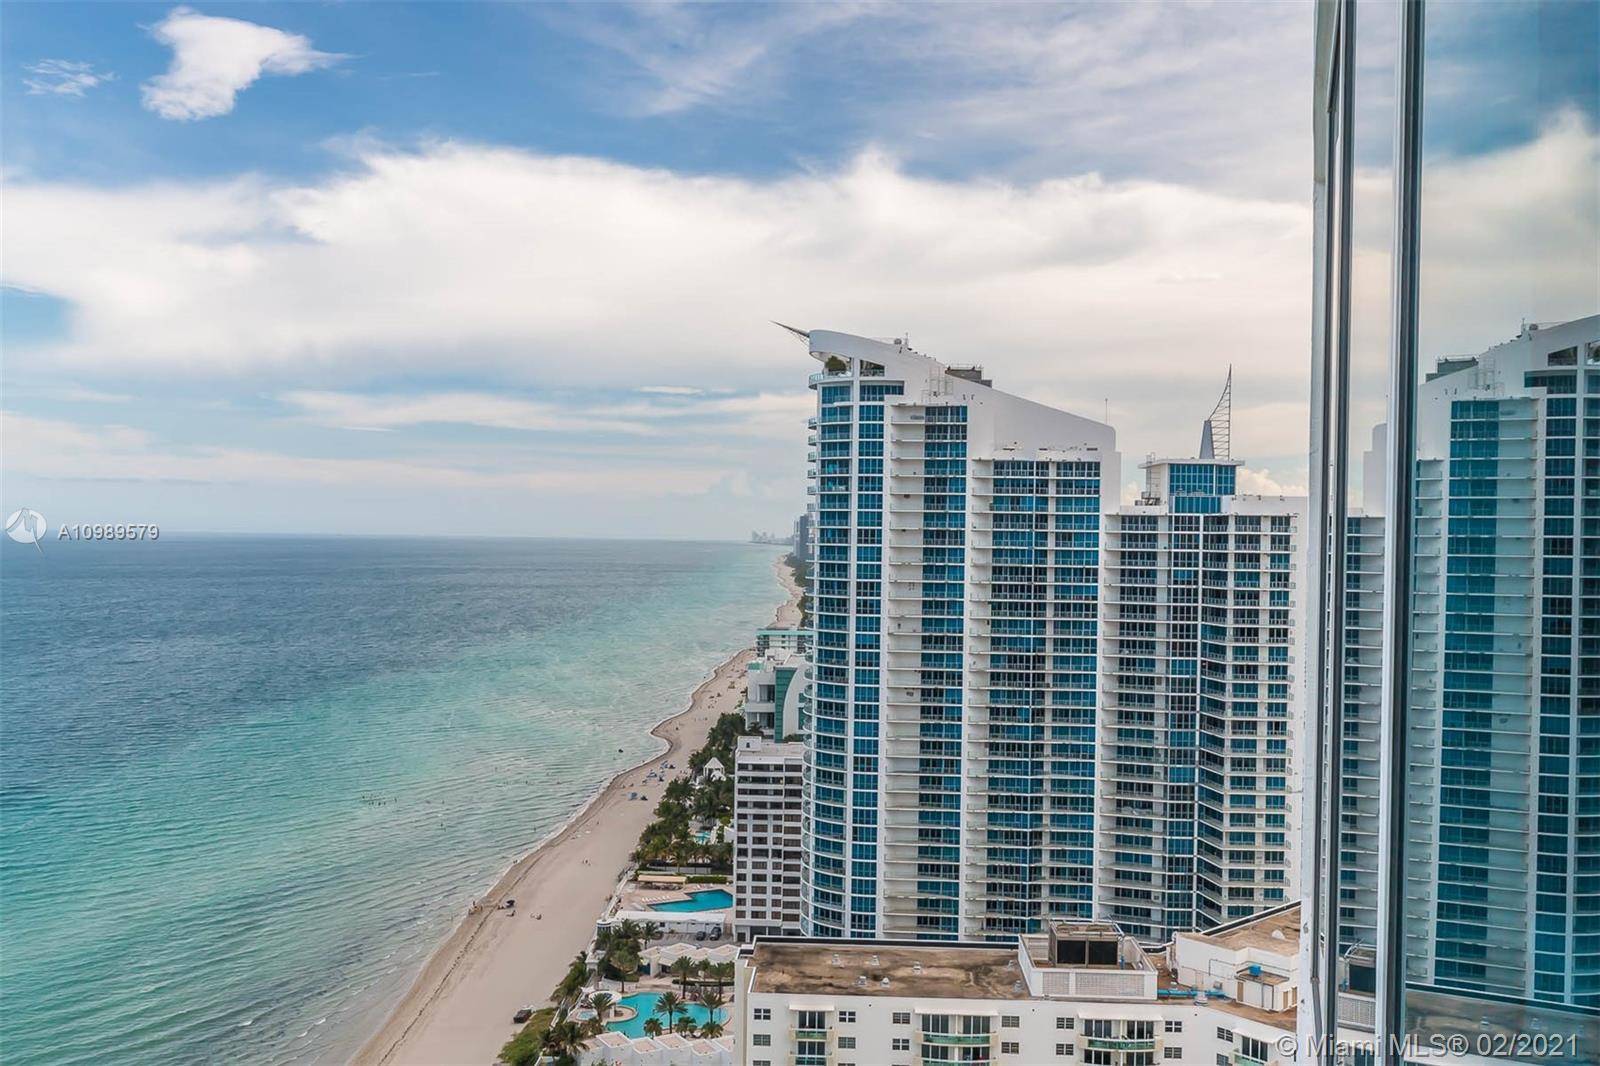 Miami Luxury Condo | Trump Hollywood | 3 Bed, 3.5 Bath Waterfront Mansion in the Sky | Private Elevator